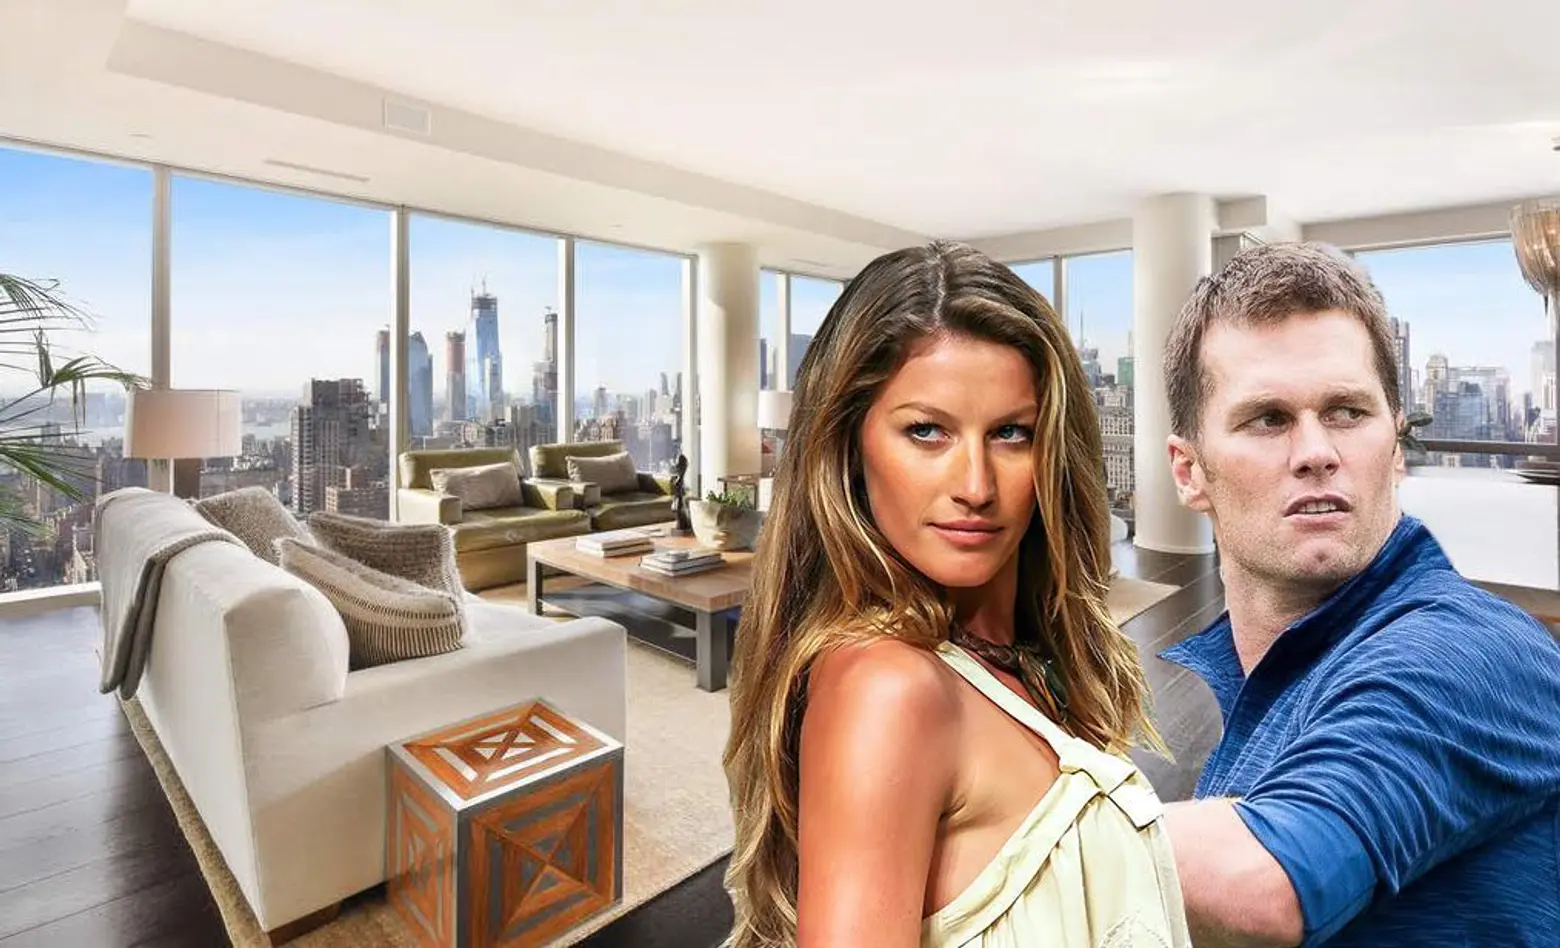 Tom Brady and Gisele Bündchen finally sell their One Madison pad after price chop to $14M